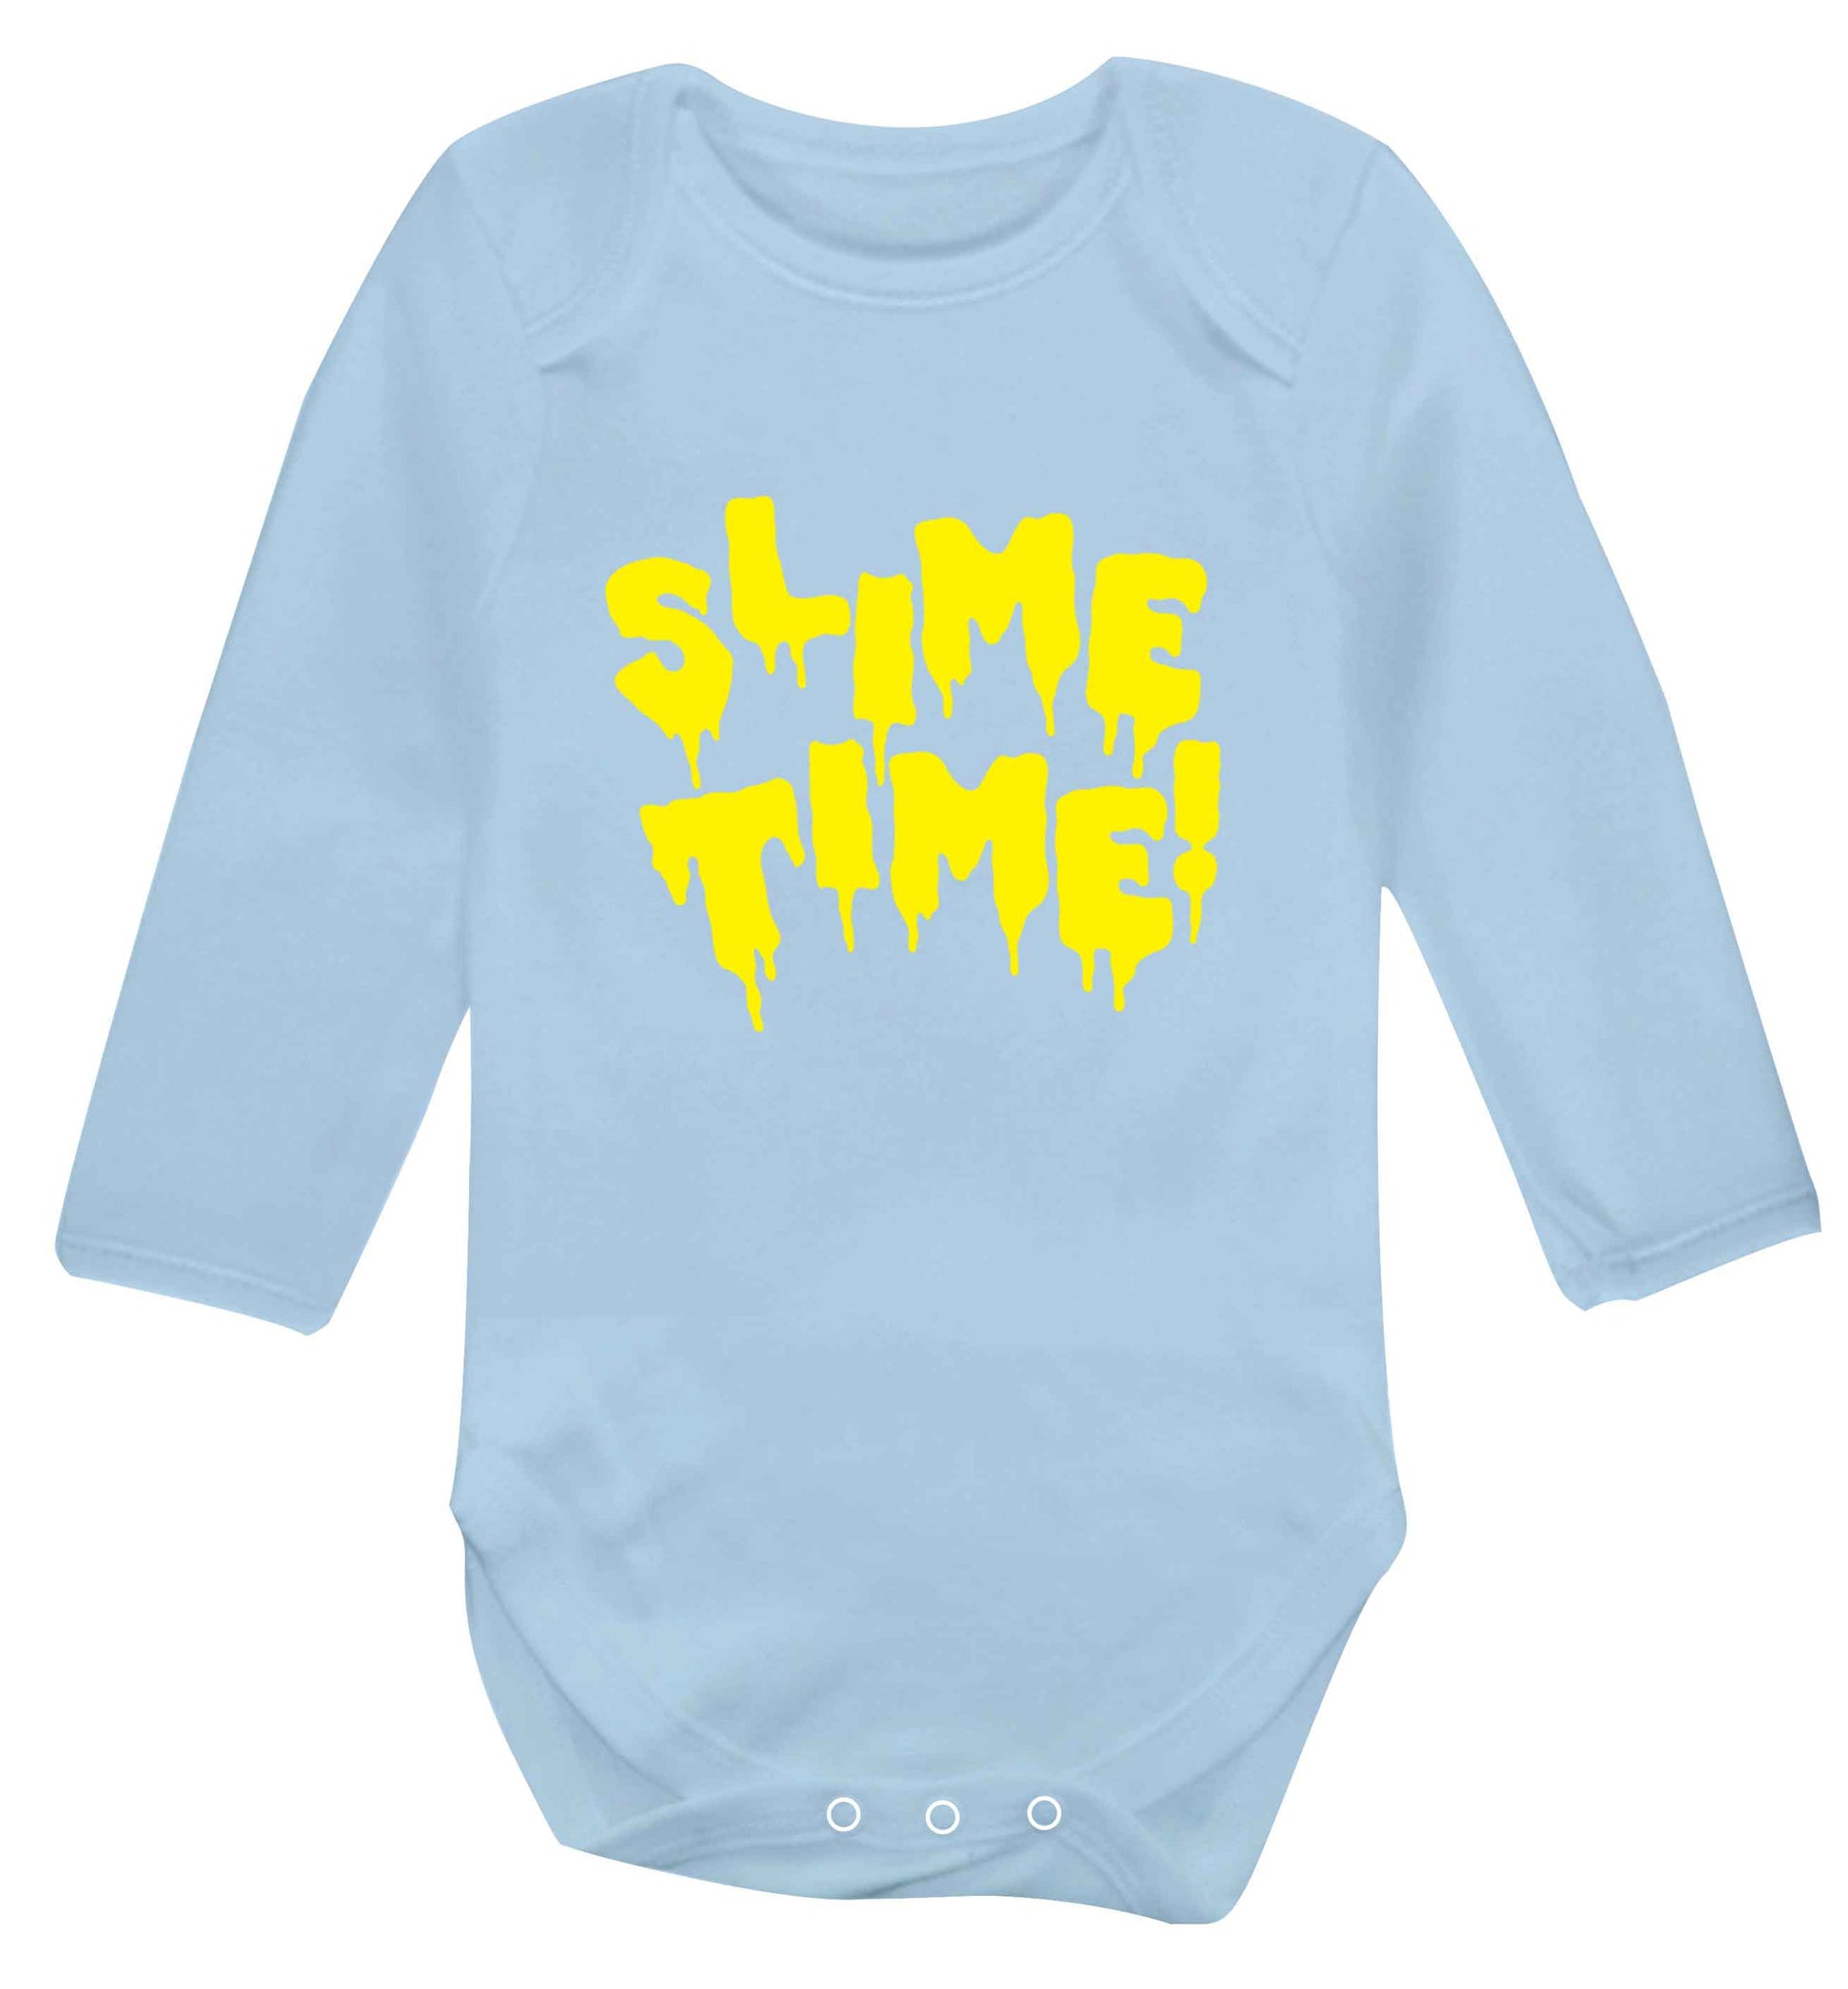 Neon yellow slime time baby vest long sleeved pale blue 6-12 months